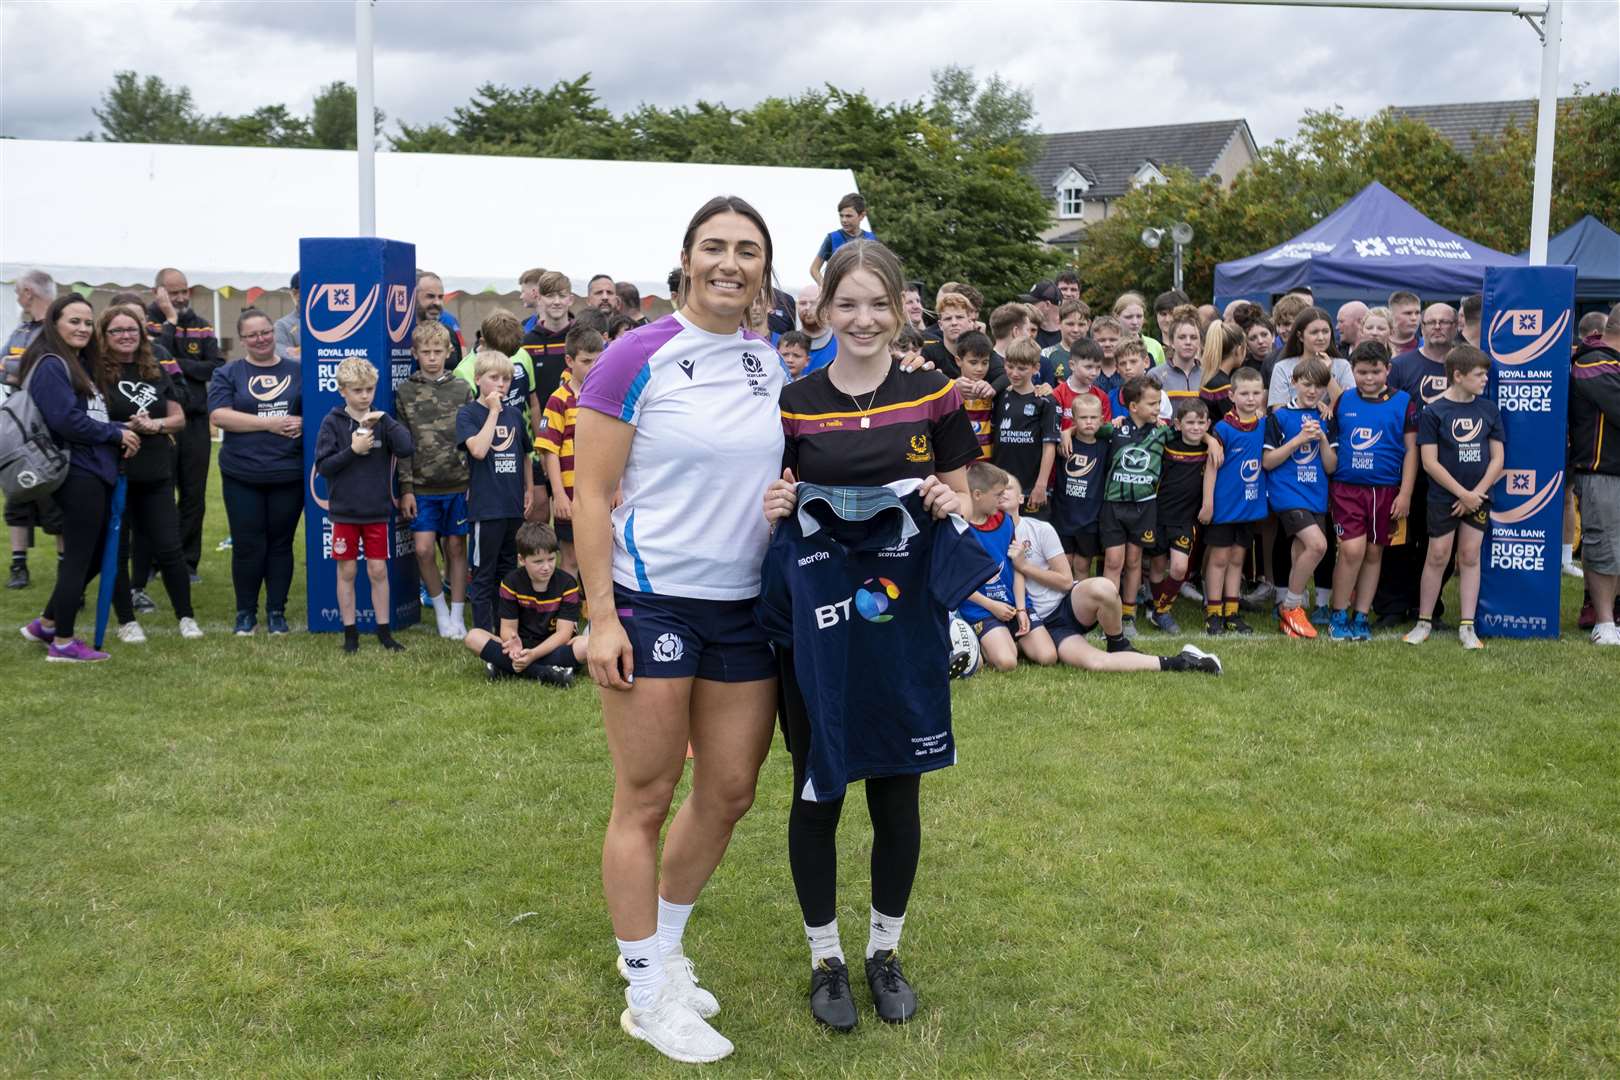 Former Ellon Rugby Club player and Scotland international Emma Wassell returned to her grassroots club to meet members of the current women's teams and presented one of her Scotland shirts to local player Megan Leiper.